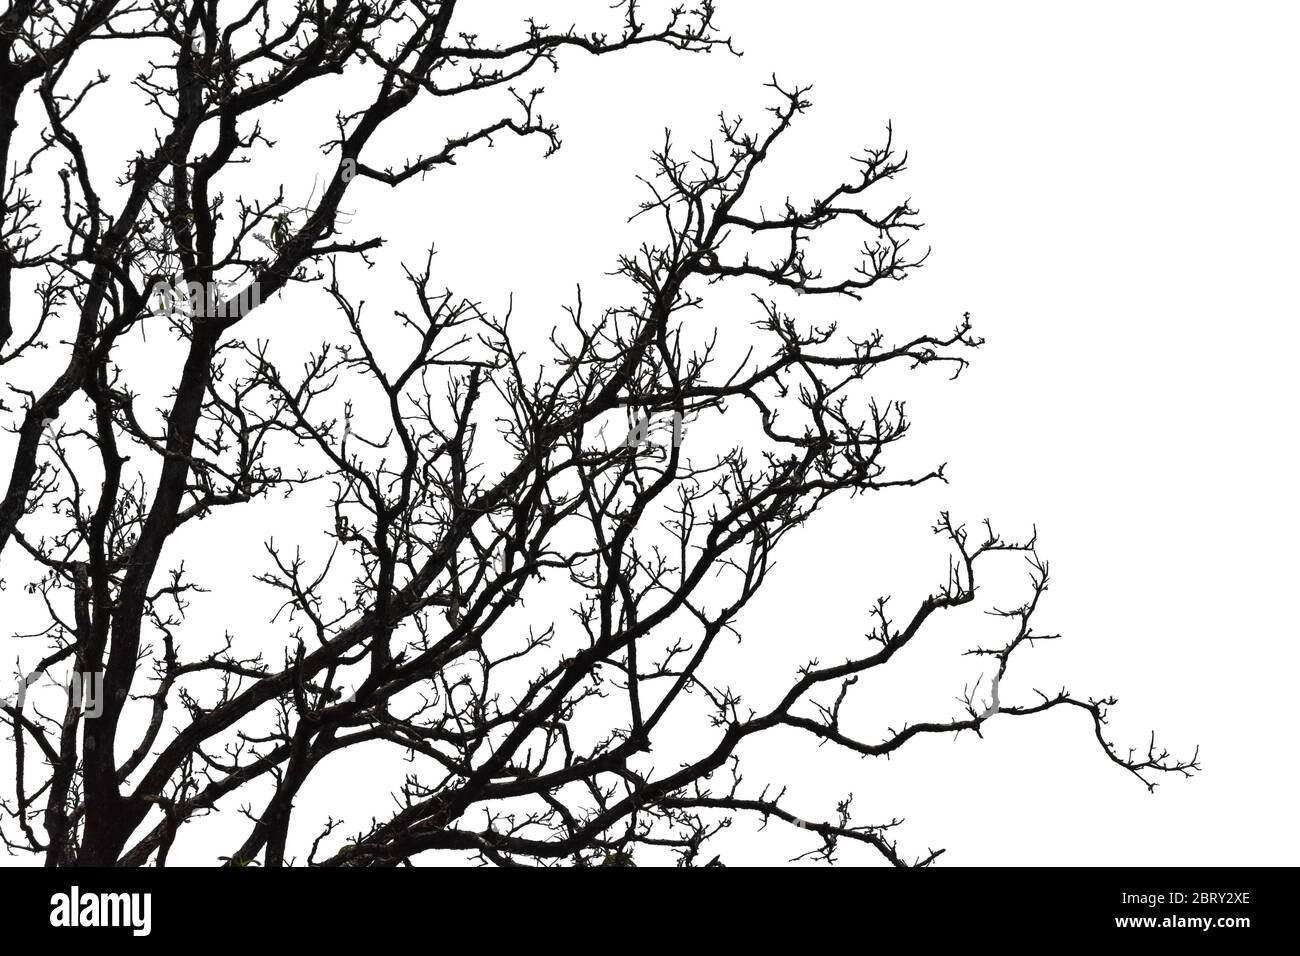 Silhouette of a leafless tree isolated on white background. Stock Photo